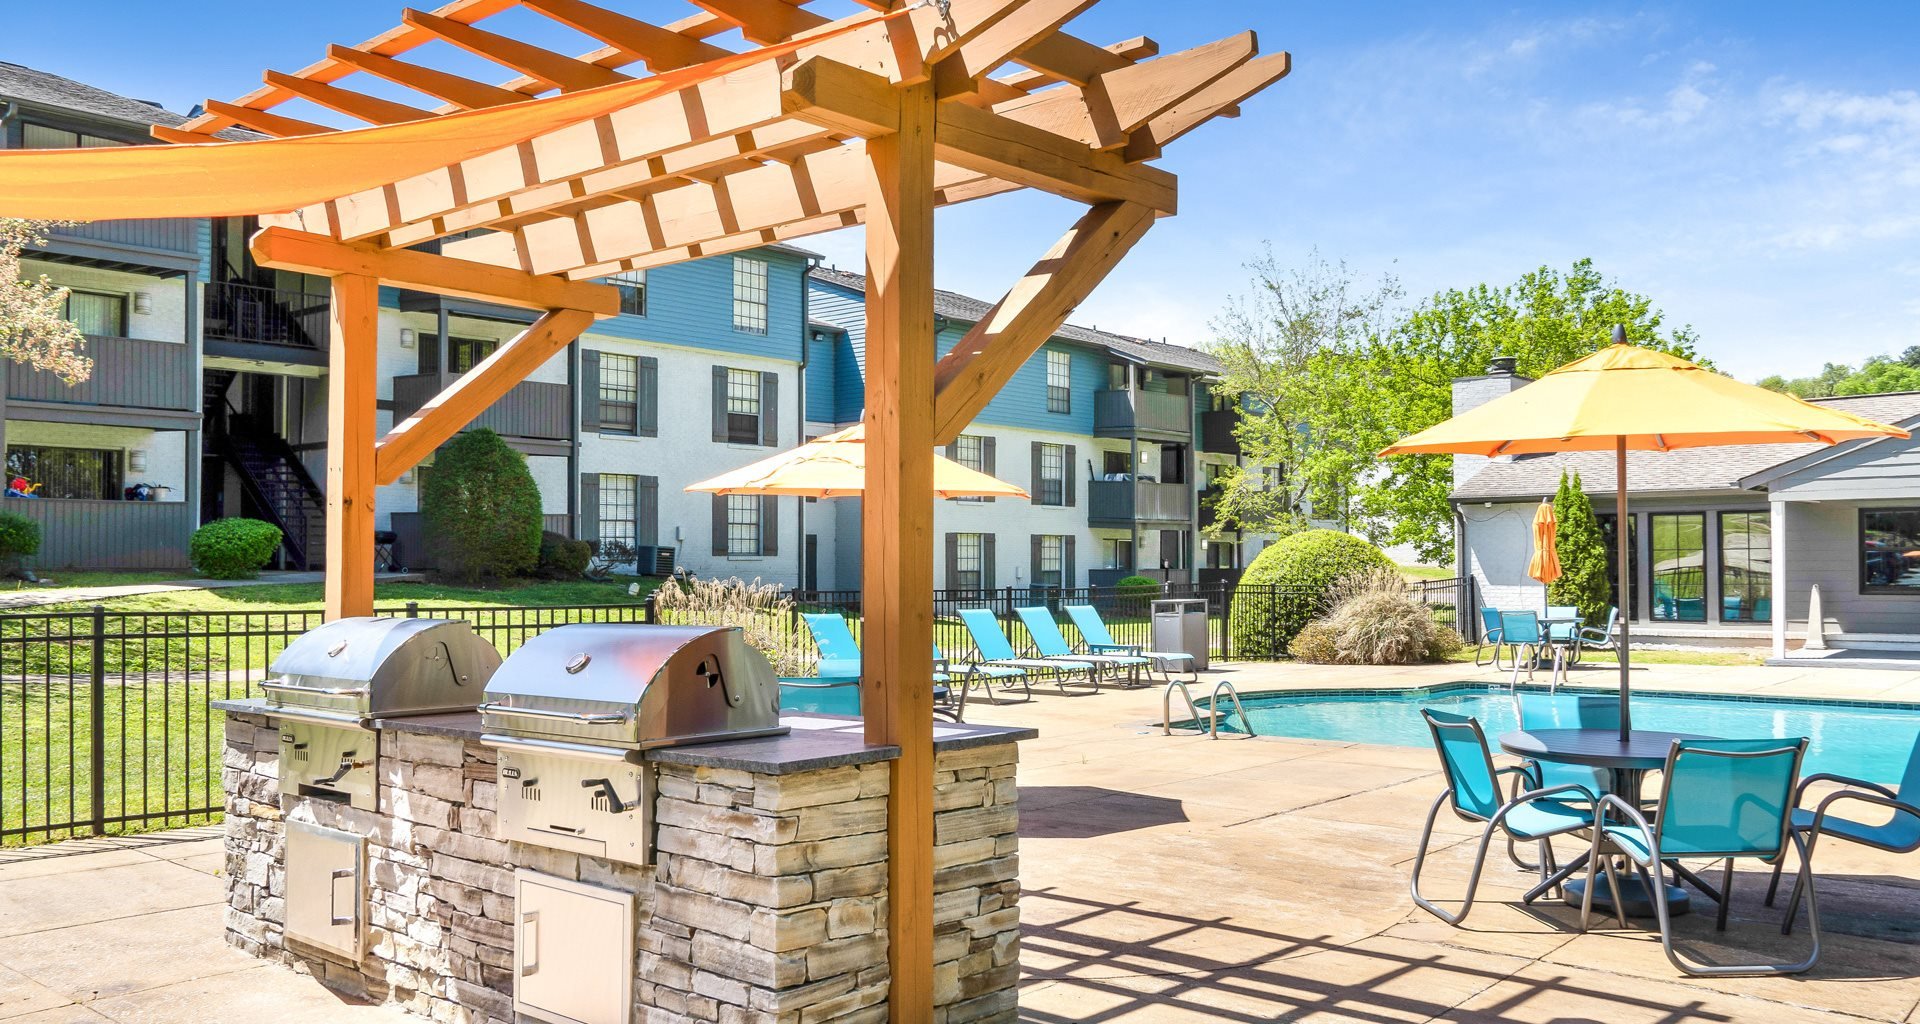 Swimming pool, lounge furniture, and grilling pergola at Crestwood Green at 701